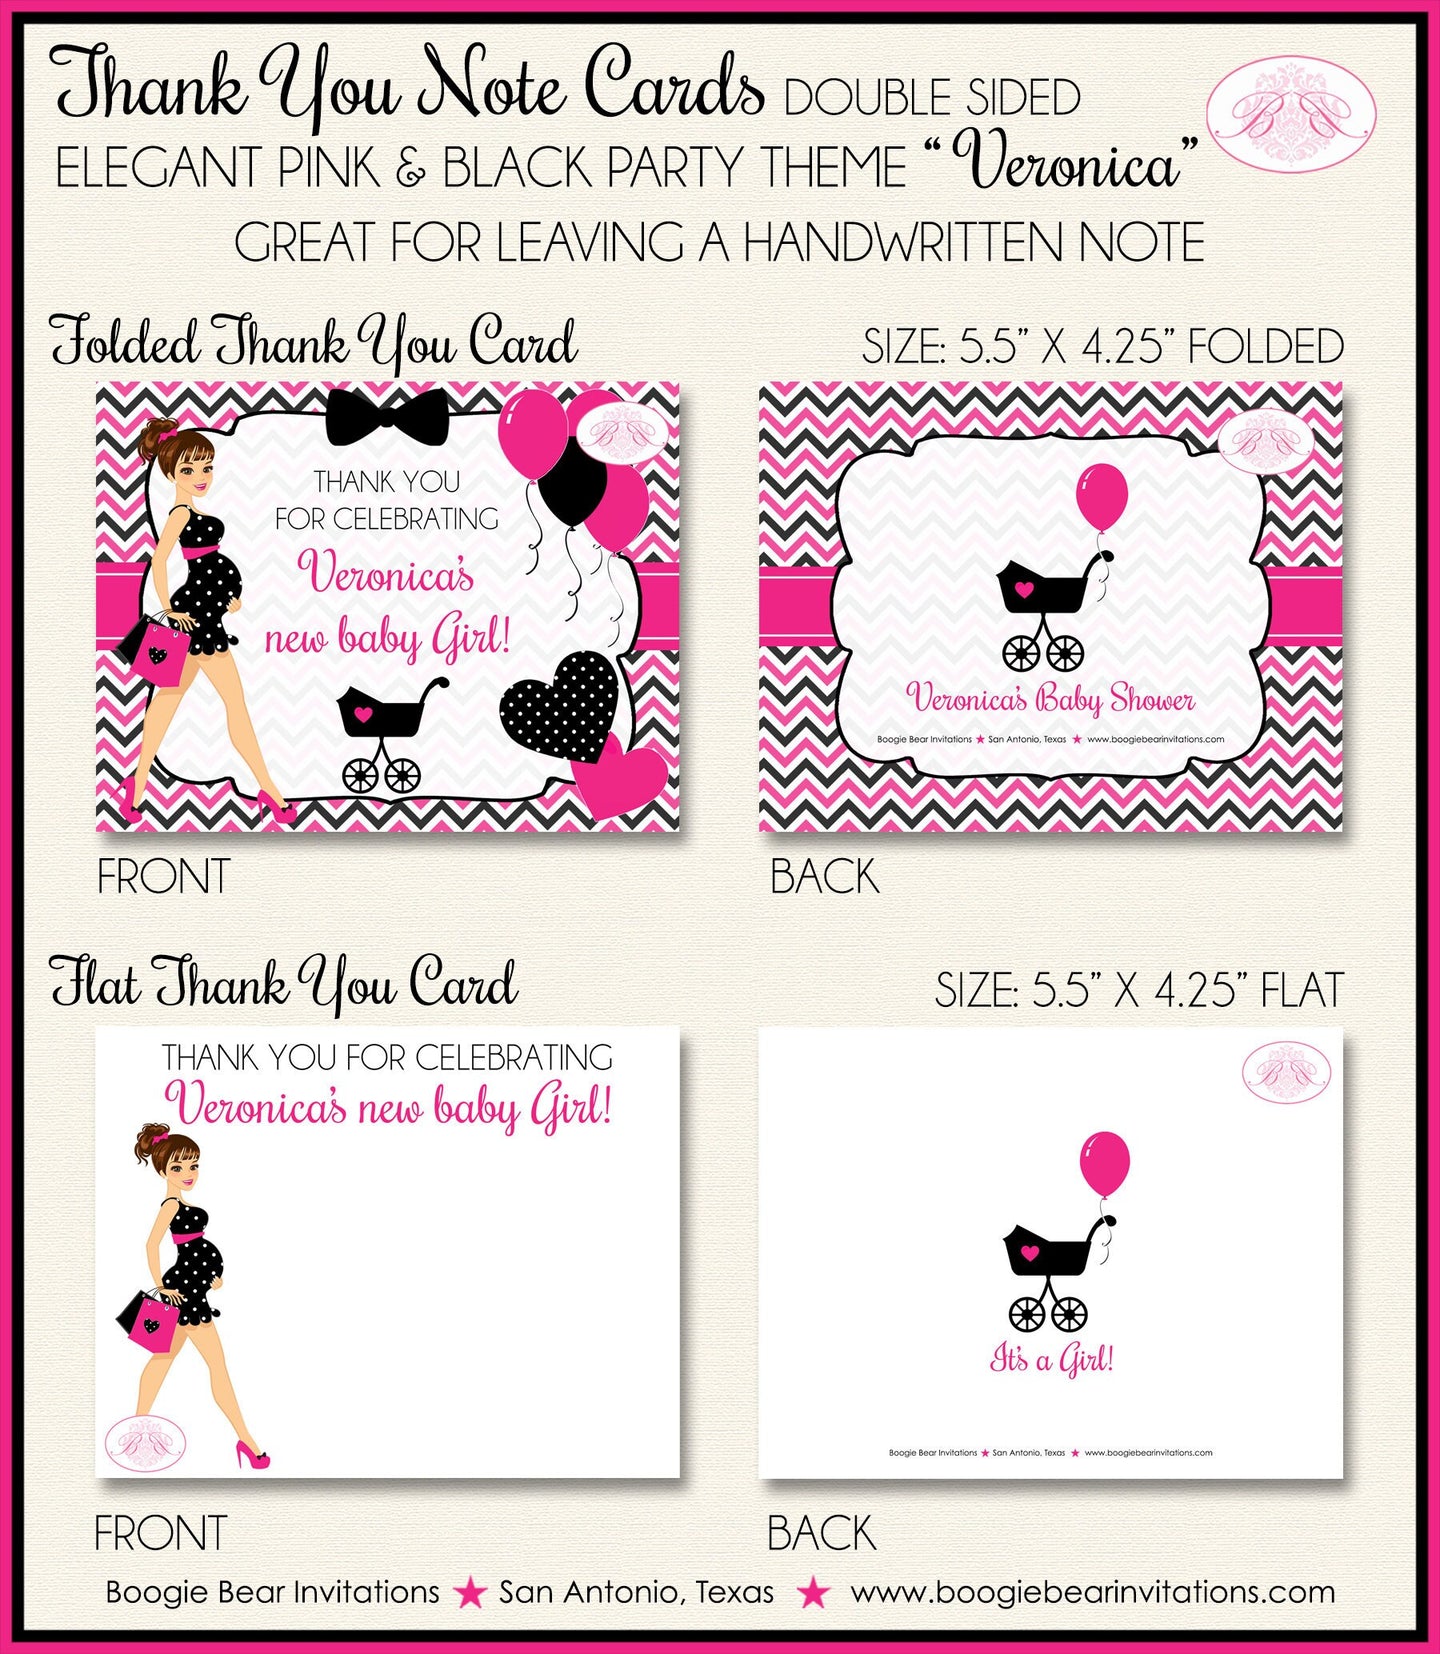 Pink Black Party Thank You Card Favor Note Baby Shower Girl Chevron Modern Chic Fashion Heart Boogie Bear Invitations Veronica Theme Printed